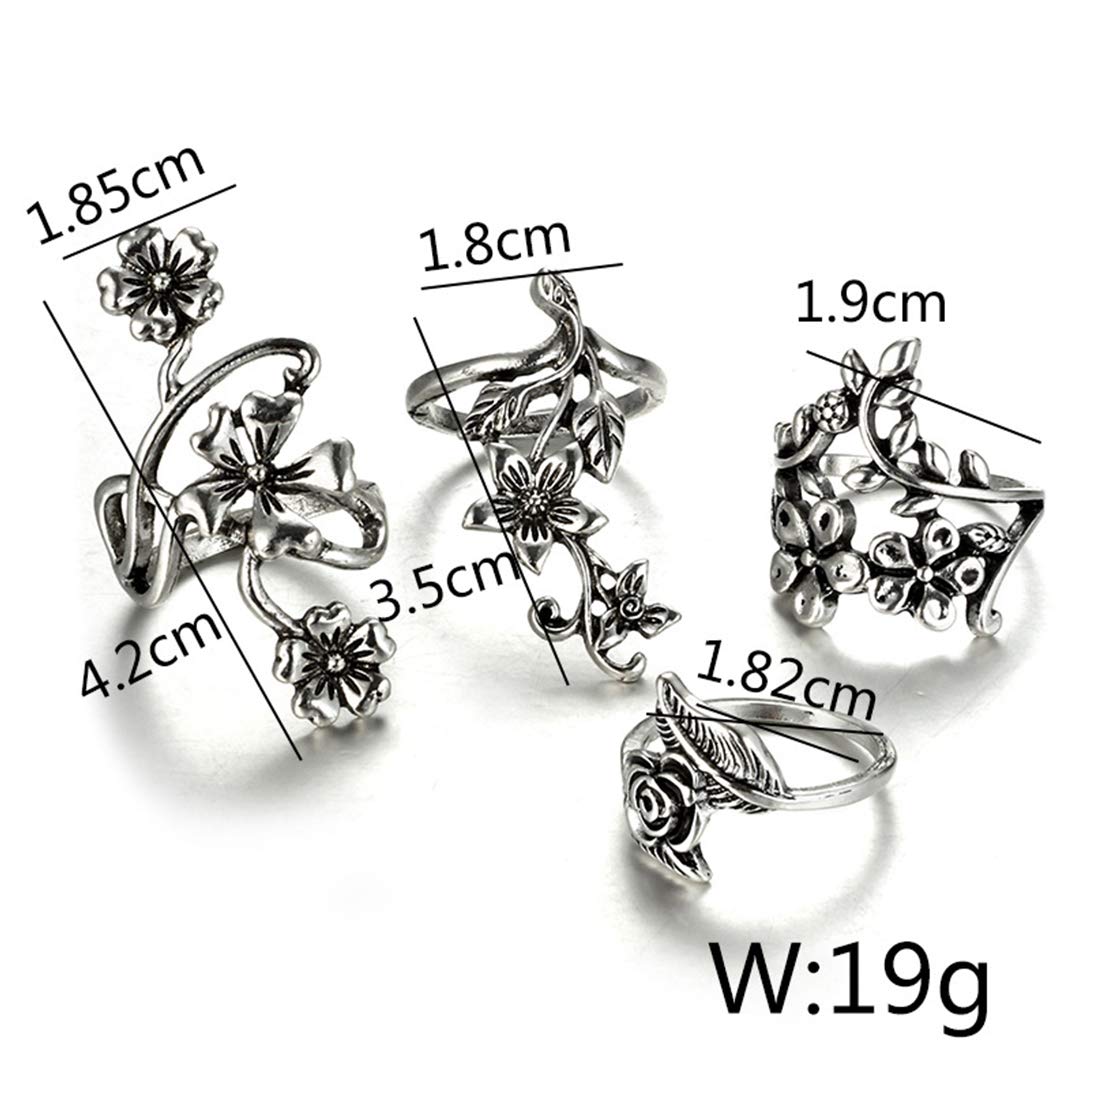 Yellow Chimes Oxidised Rings for Women 4 Pcs Ring Set Boho Vintage Leaves & Rose Floral Shaped Oxidised Silver Plated Rings For Women and Girl's.